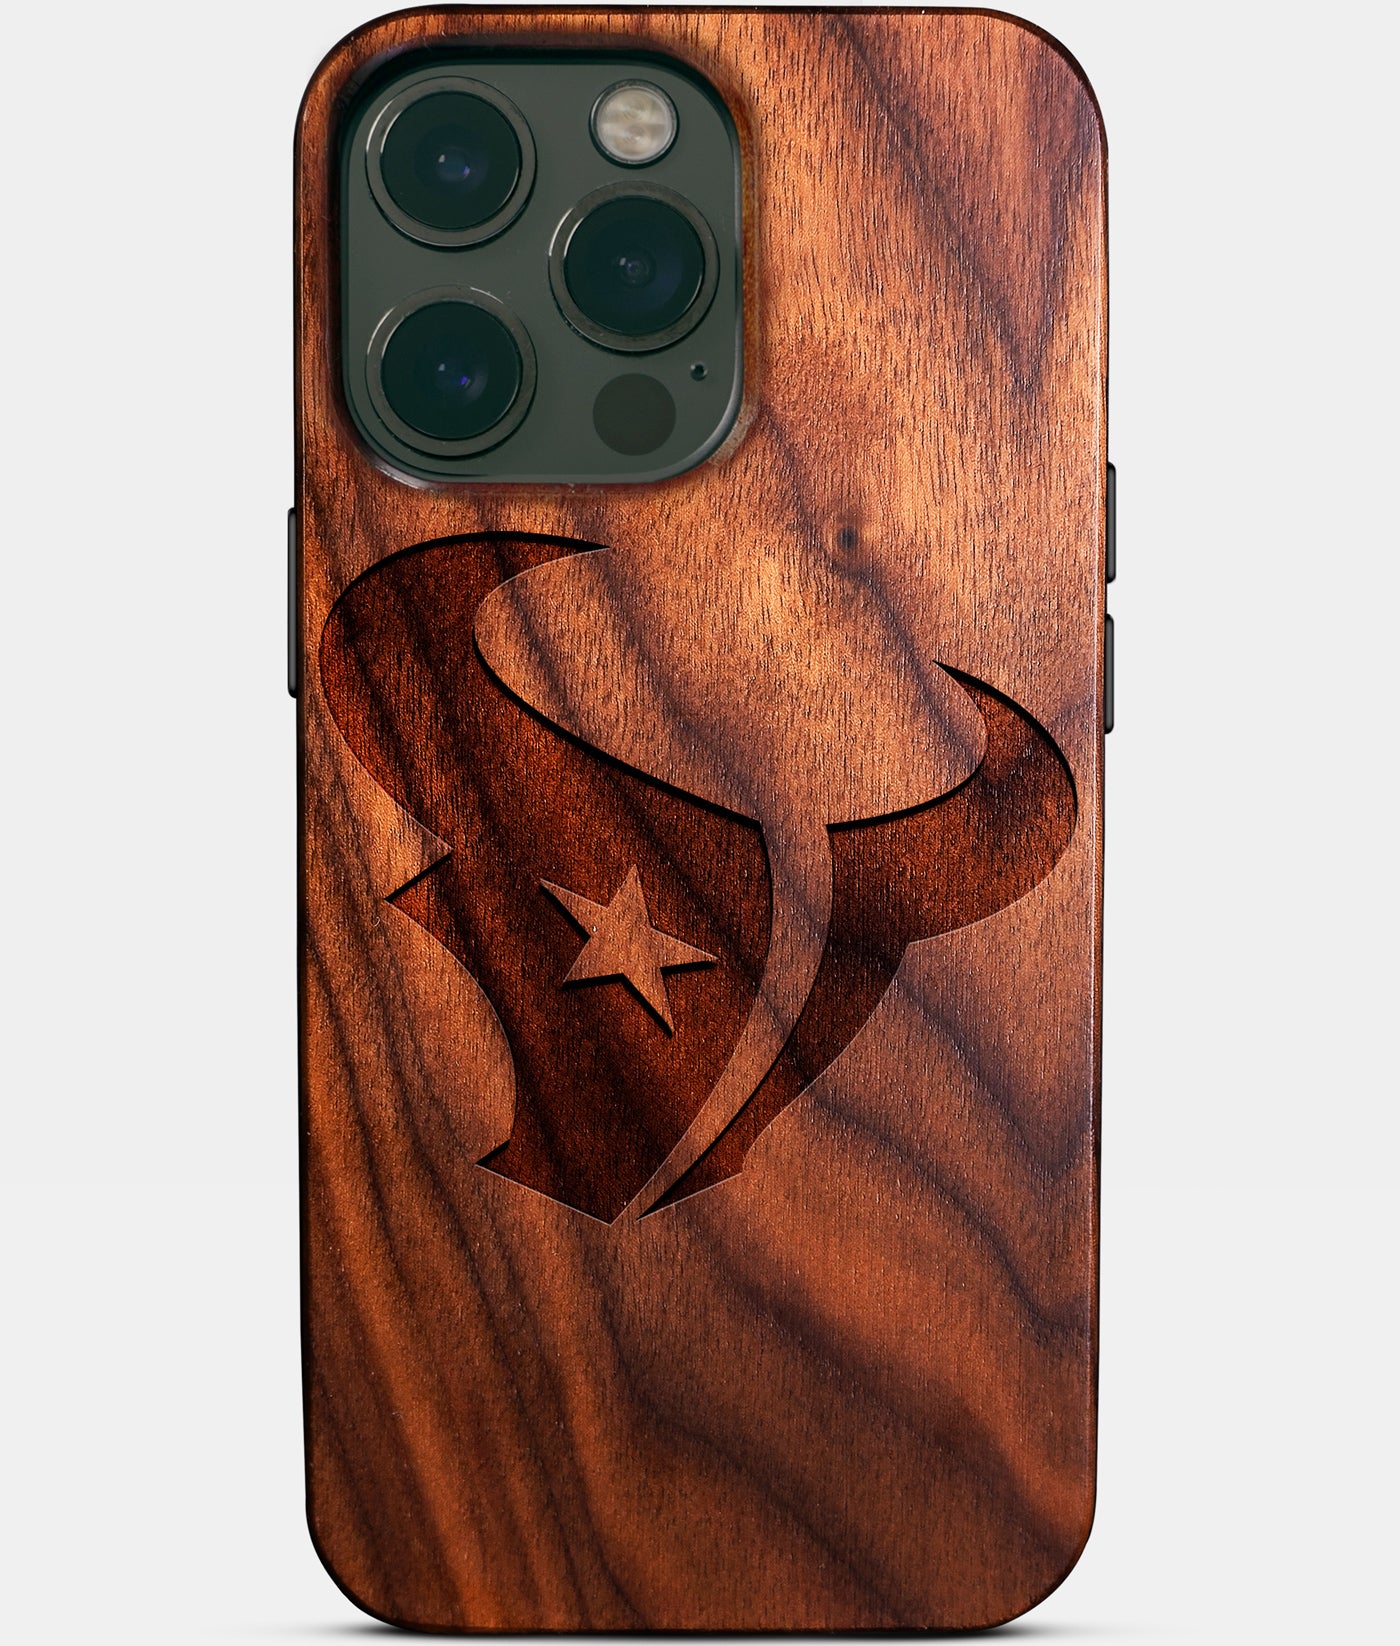 Custom Houston Texans iPhone 14/14 Pro/14 Pro Max/14 Plus Case - Carved Wood Texans Cover - Eco-friendly Houston Texans iPhone 14 Case - Custom Houston Texans Gift For Him - Monogrammed Personalized iPhone 14 Cover By Engraved In Nature